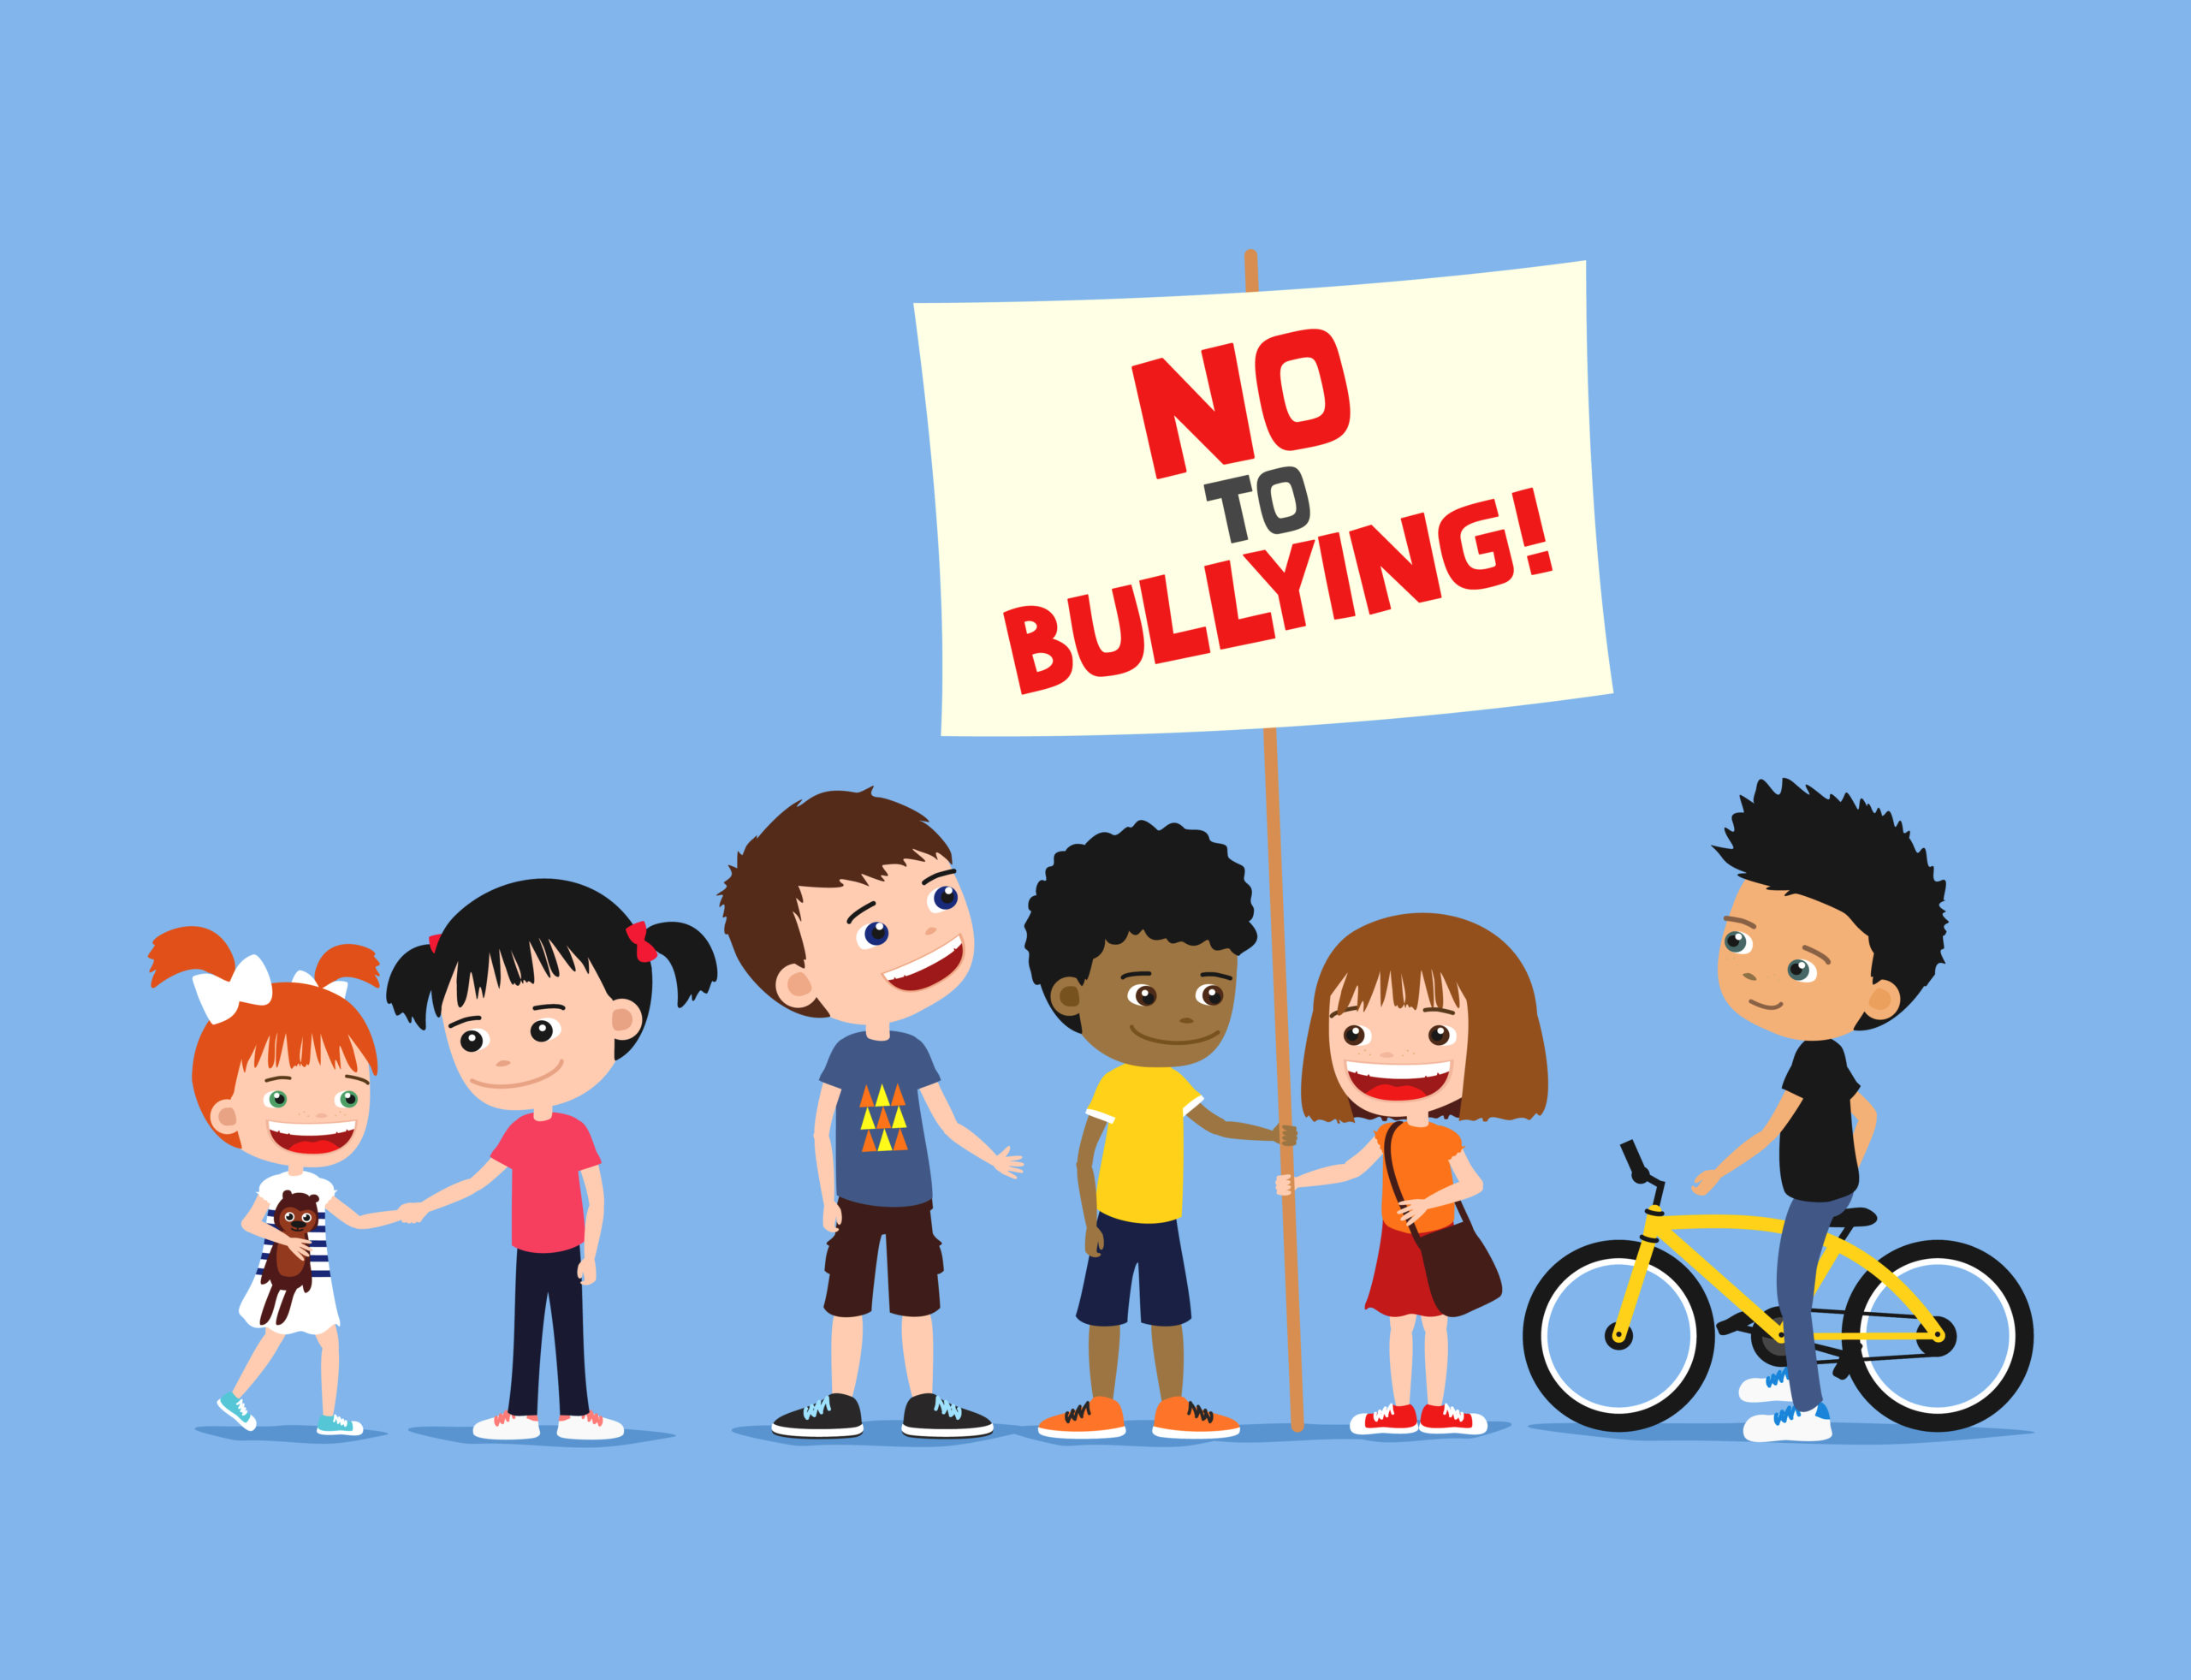 Let’s stand united against bullying PLMR